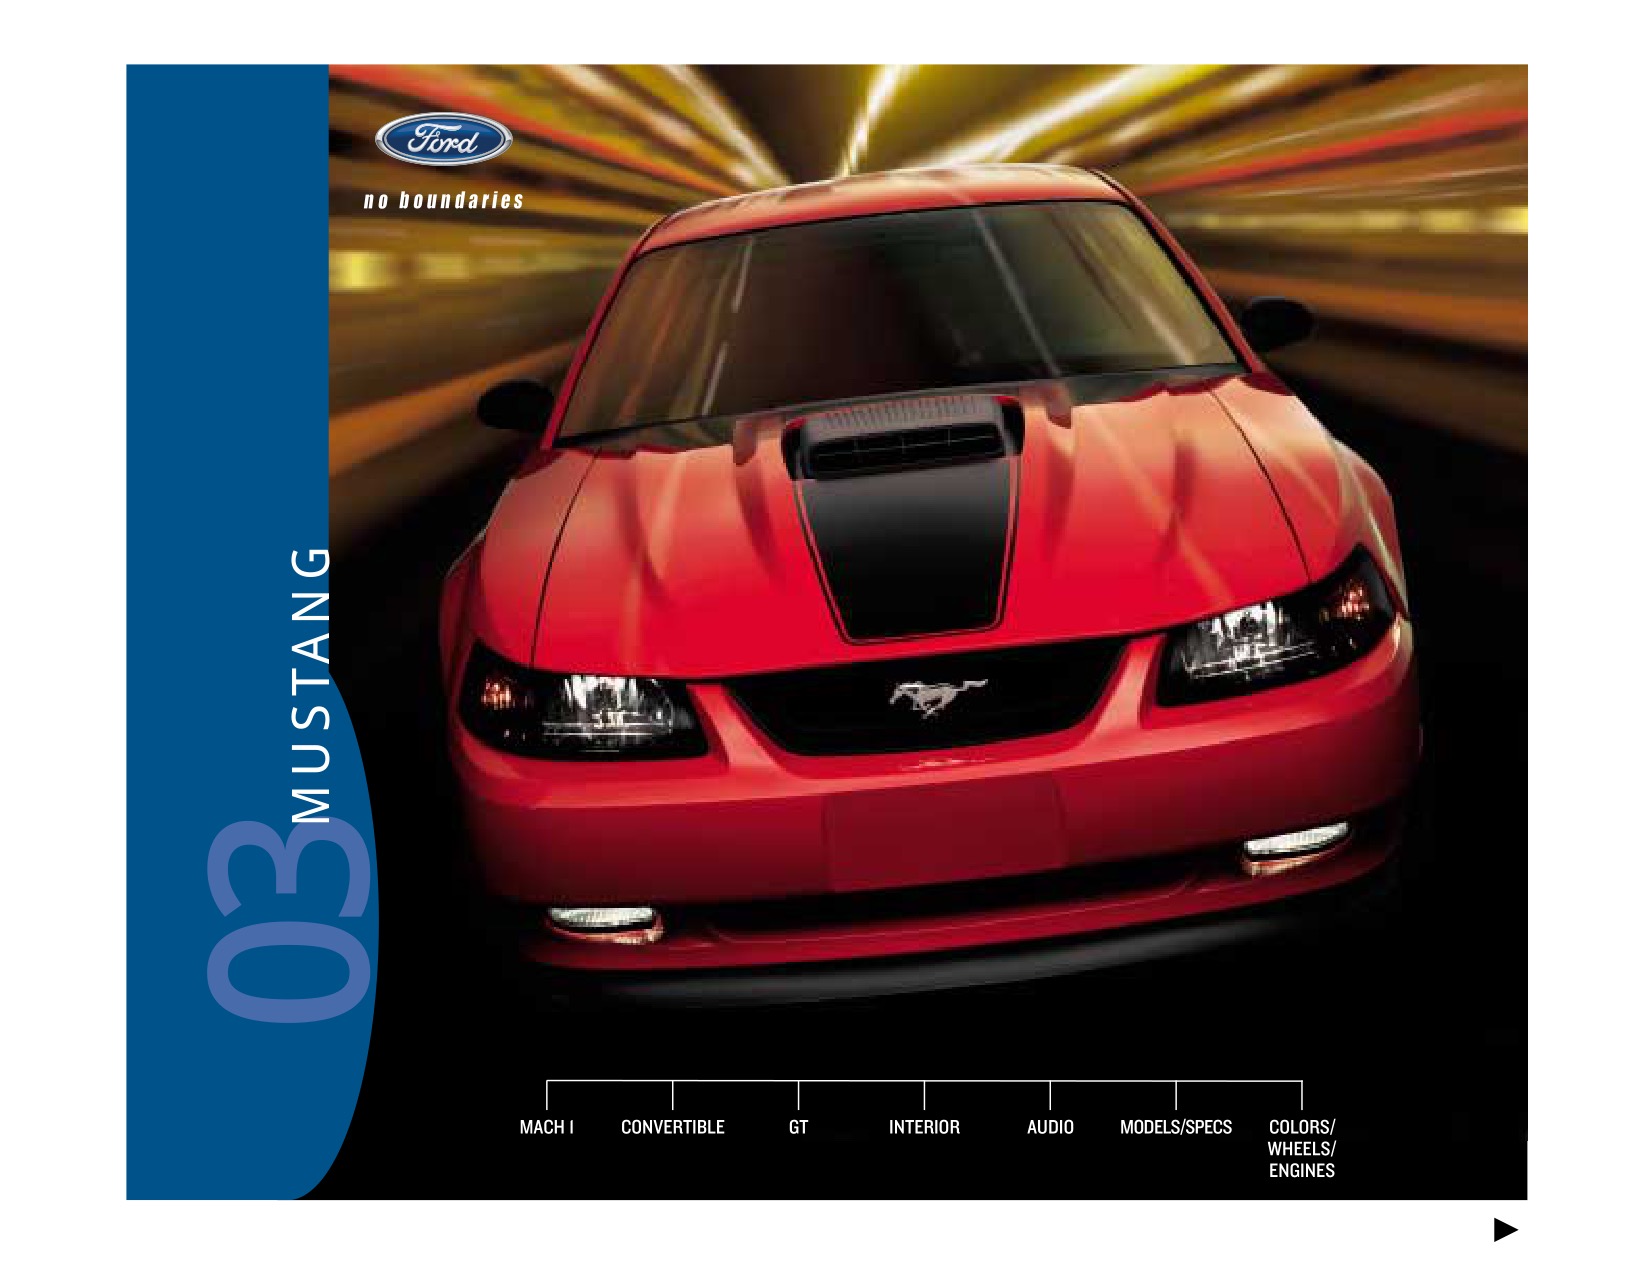 2003 Ford Mustang Brochure